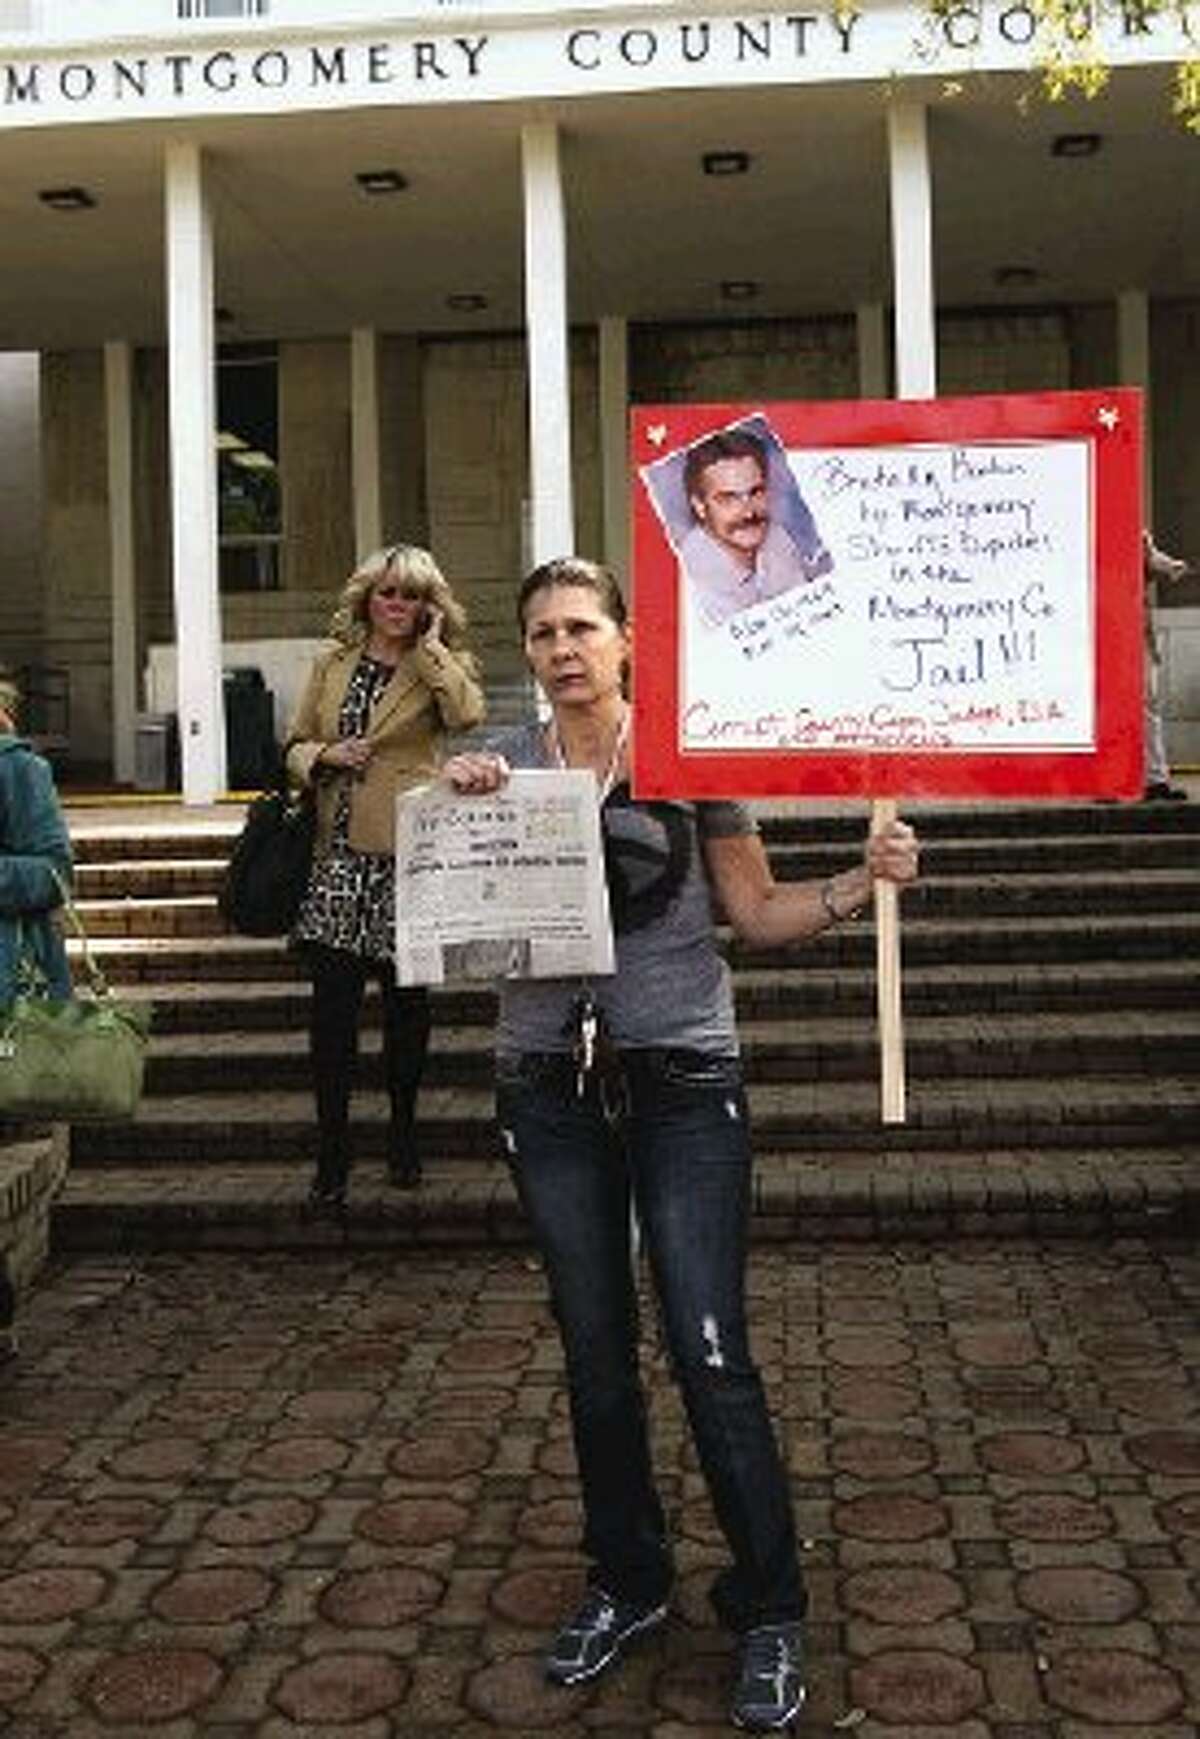 Cissy Wakat-Aikins stands in front of the county courthouse Thursday morning to create awareness surrounding the death of her brother James Mitchell. He died March 23, 2003, while in the Montgomery County Jail.